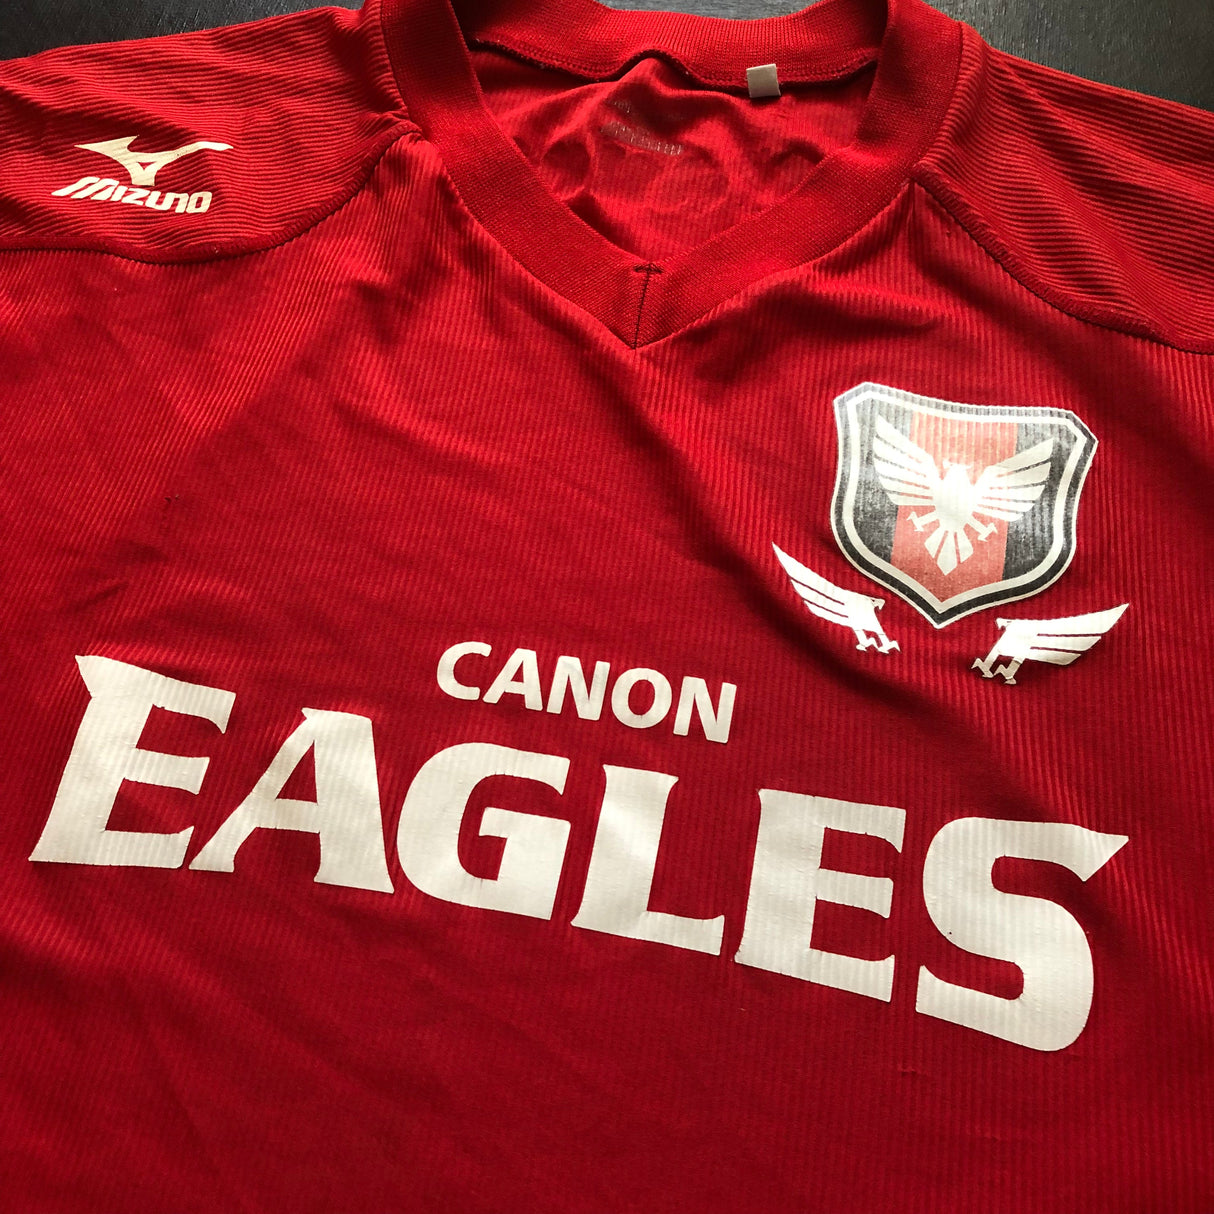 Canon Eagles Rugby Team Training Tee 2XO Underdog Rugby - The Tier 2 Rugby Shop 